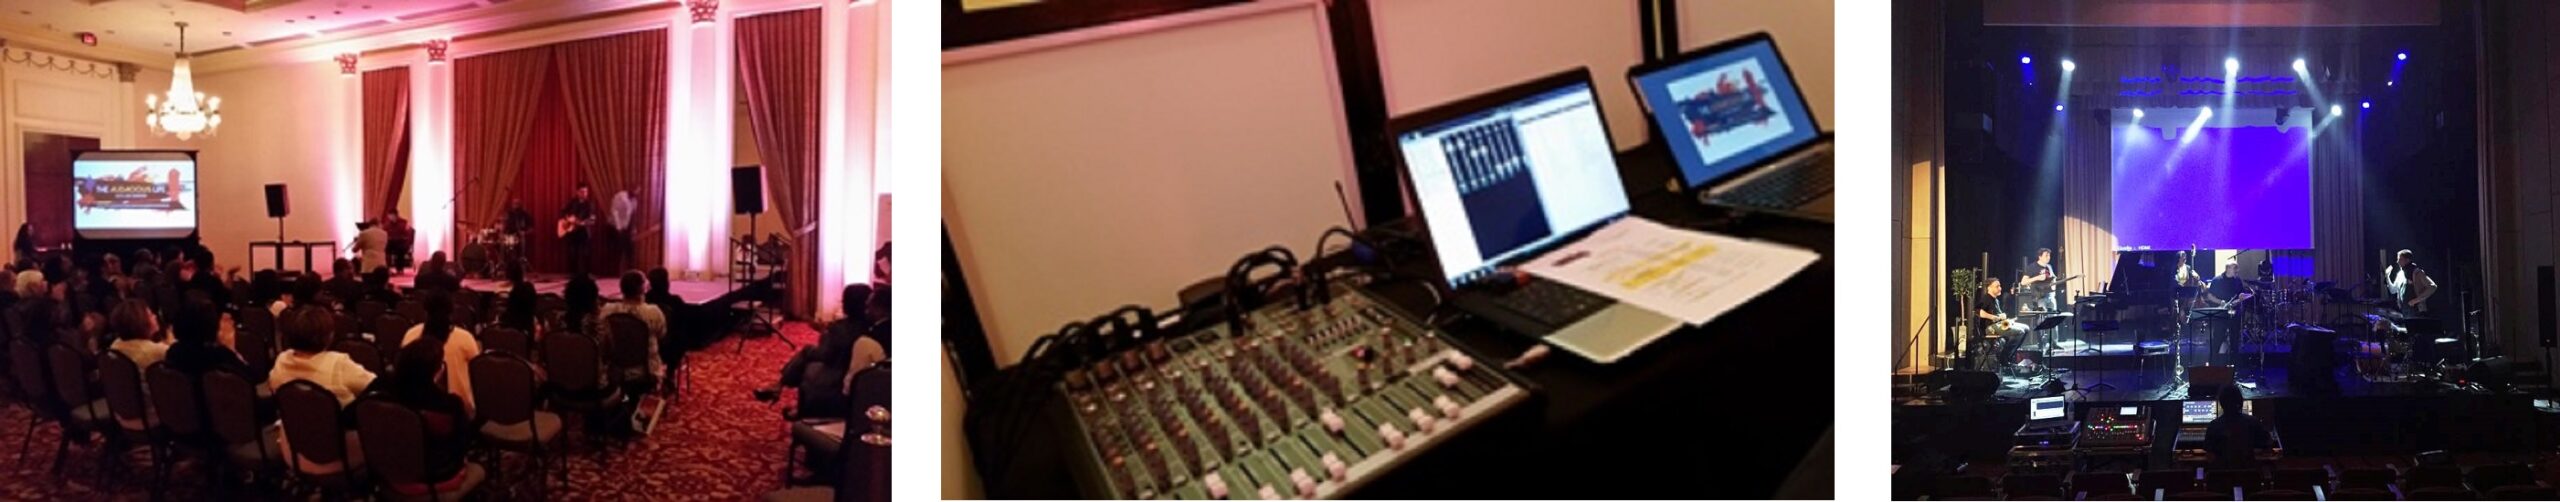 Digital Mixer Board, Sound System, AudioHouston Sound Reinforcement, Stage, Audio, engineer, technician, Sound system, Live music, band, monitors, speakers, subwoofers, Houston DJ, DJs in Houston, Sonido DJ Sammy De Houston, Awesome Music Entertainment, Awesome Event Pros, AME DJs